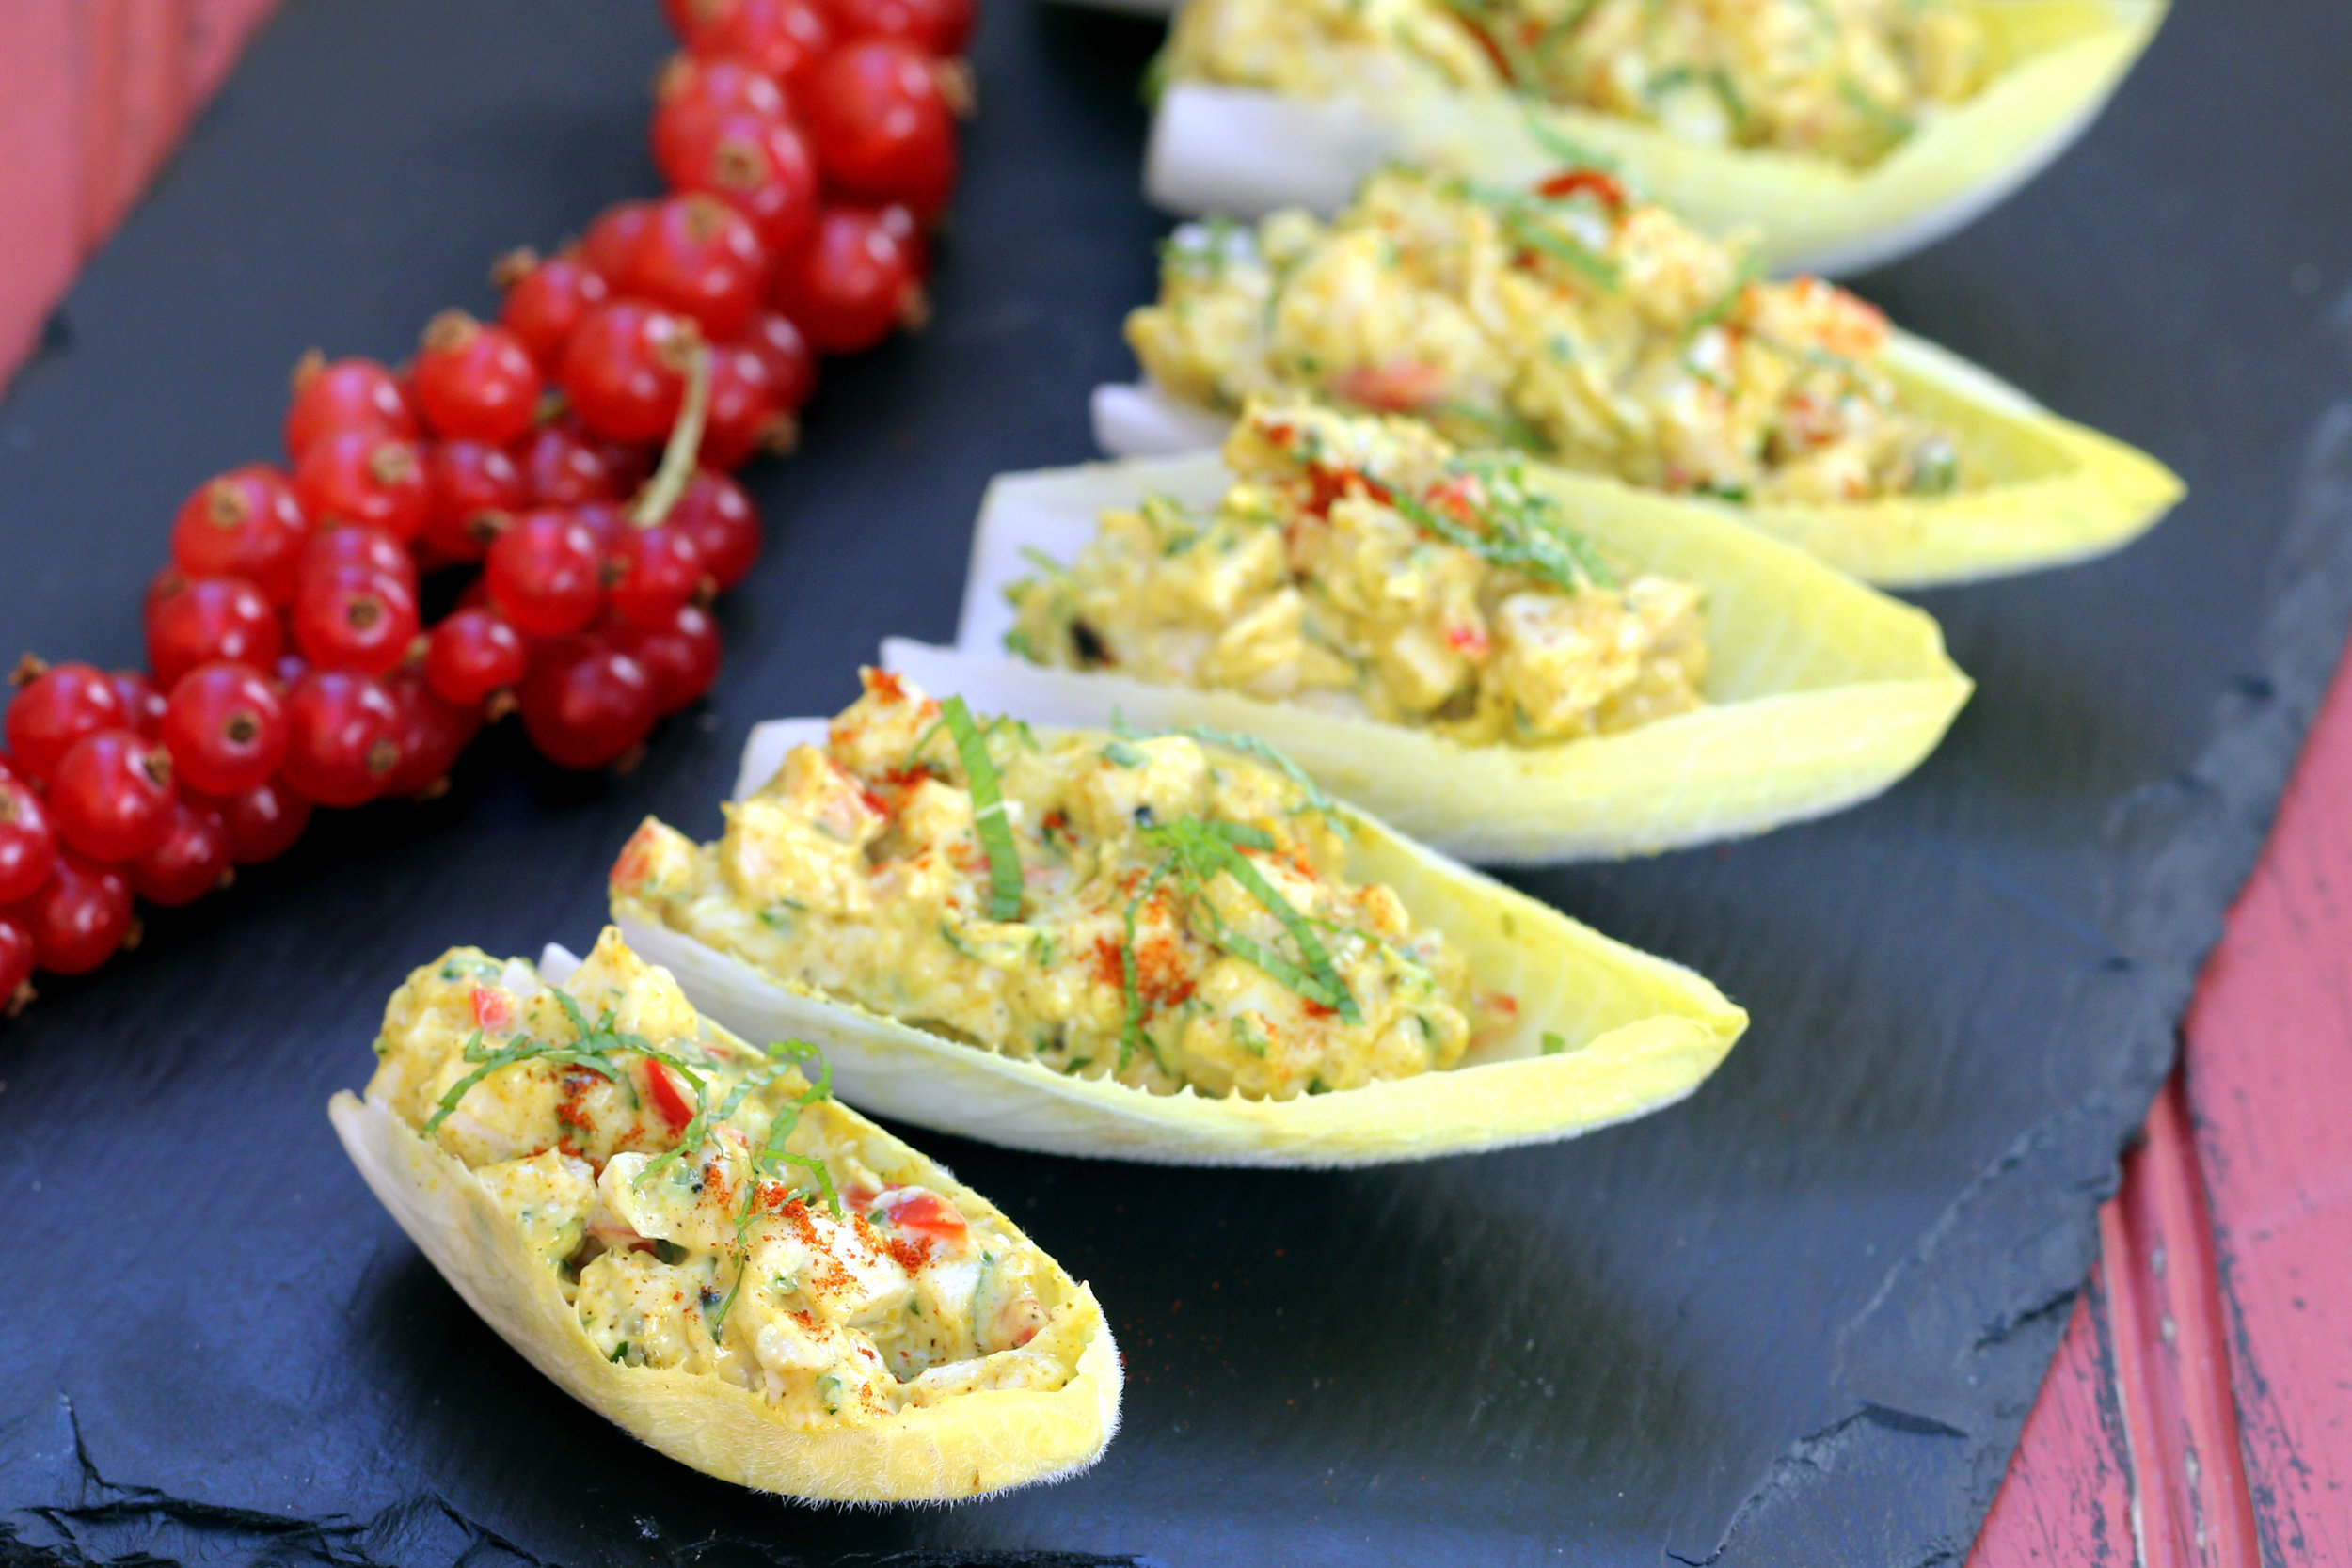 LOW CARB KETO CURRIED CHICKEN SALAD IN ENDIVE CANAPE APPETIZER RECIPE.jpg